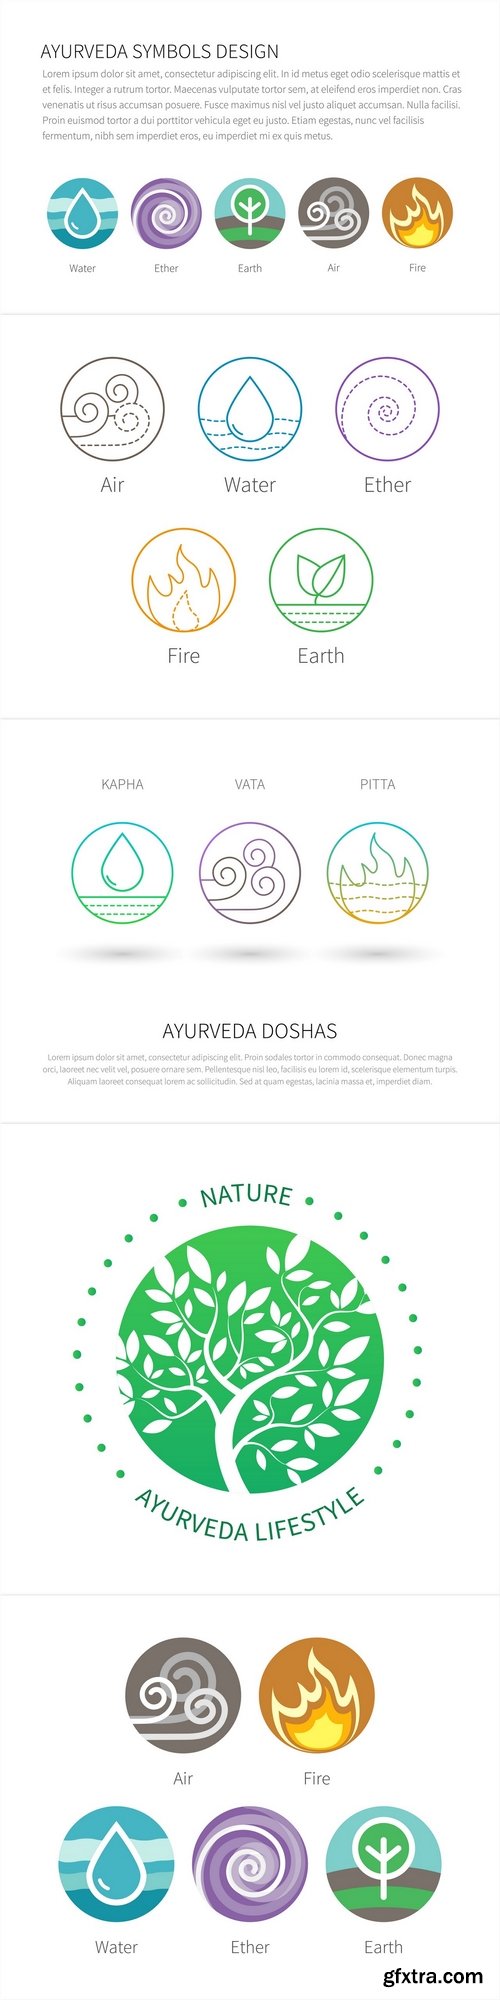 Ayurvedic elements water, fire, air, earth and ether icons